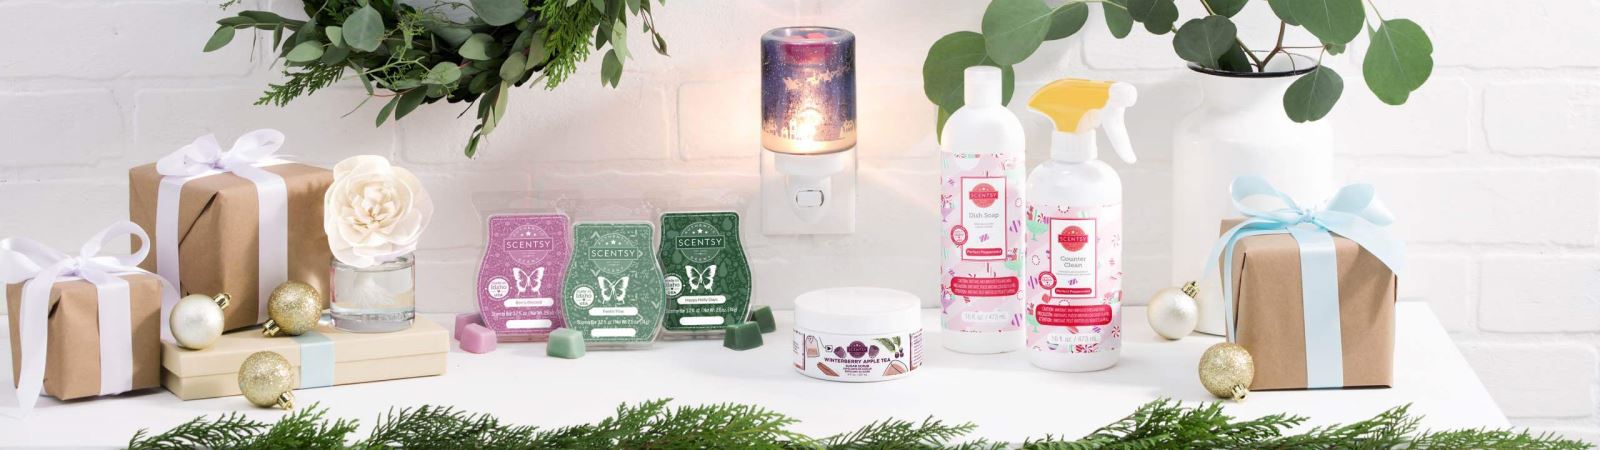 2020 Scentsy Holiday Collection